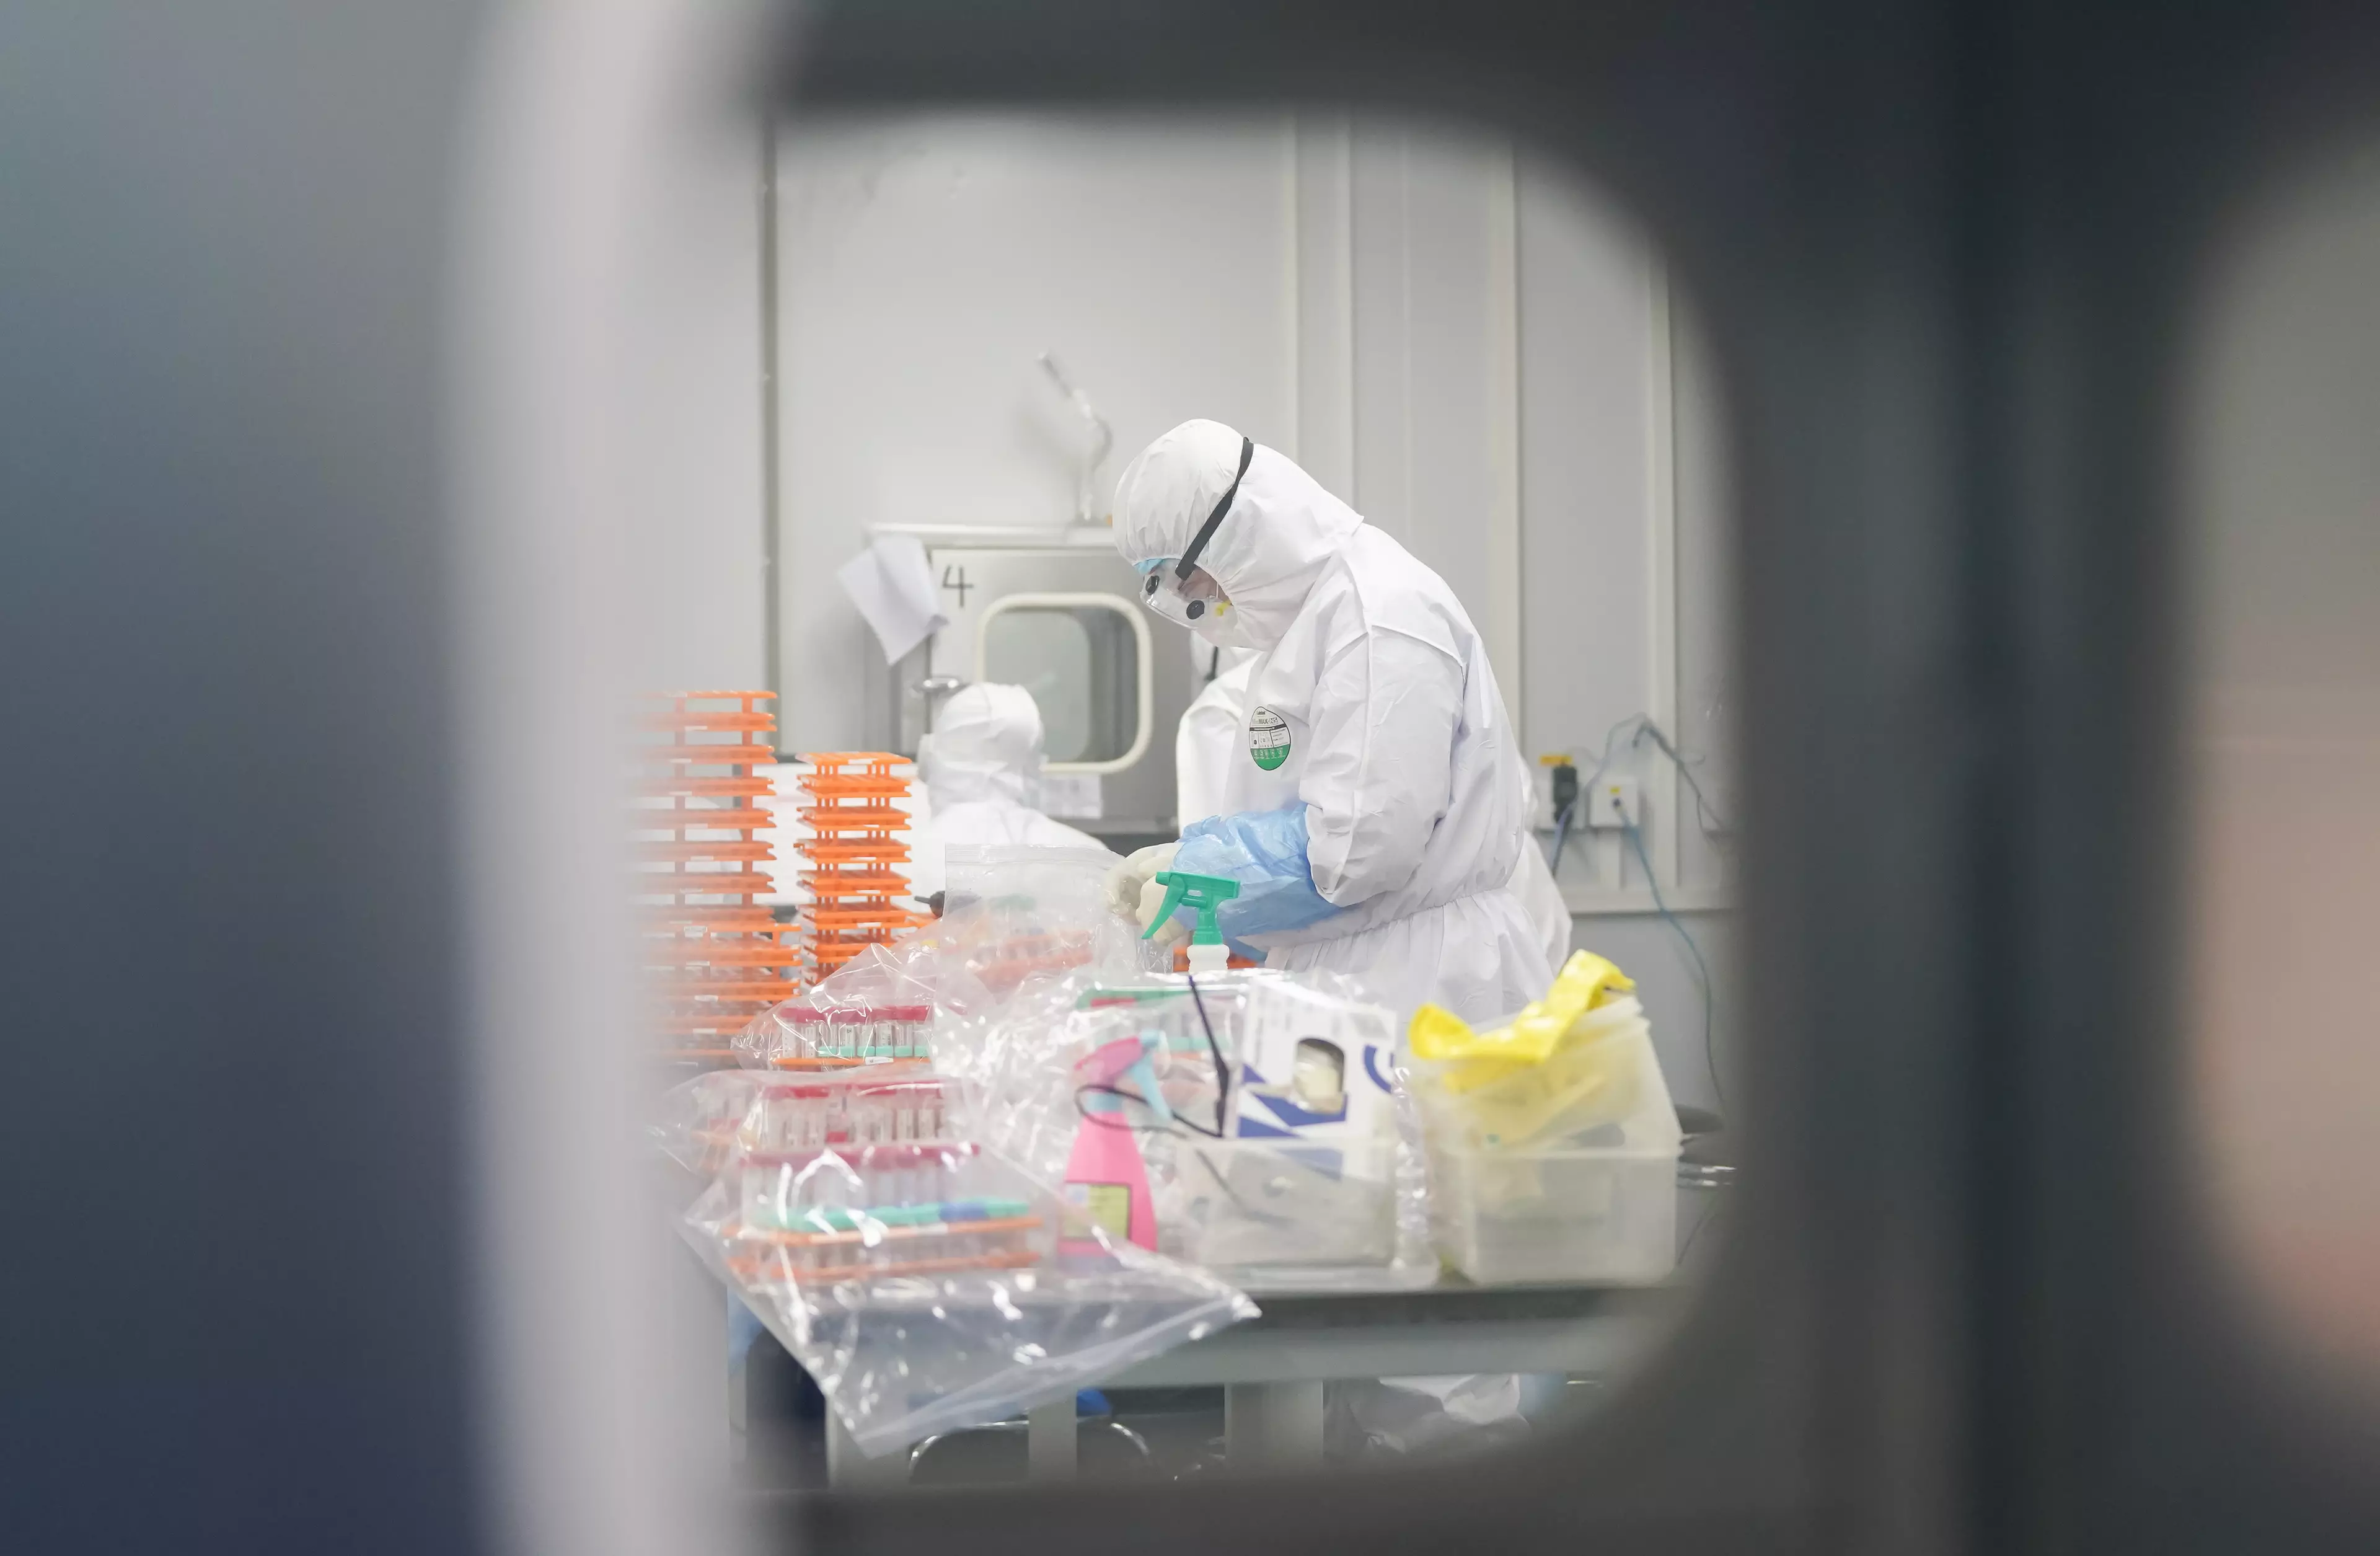 A staff member handles nucleic acid testing samples at a novel coronavirus detection lab in Wuhan, central China's Hubei Province.